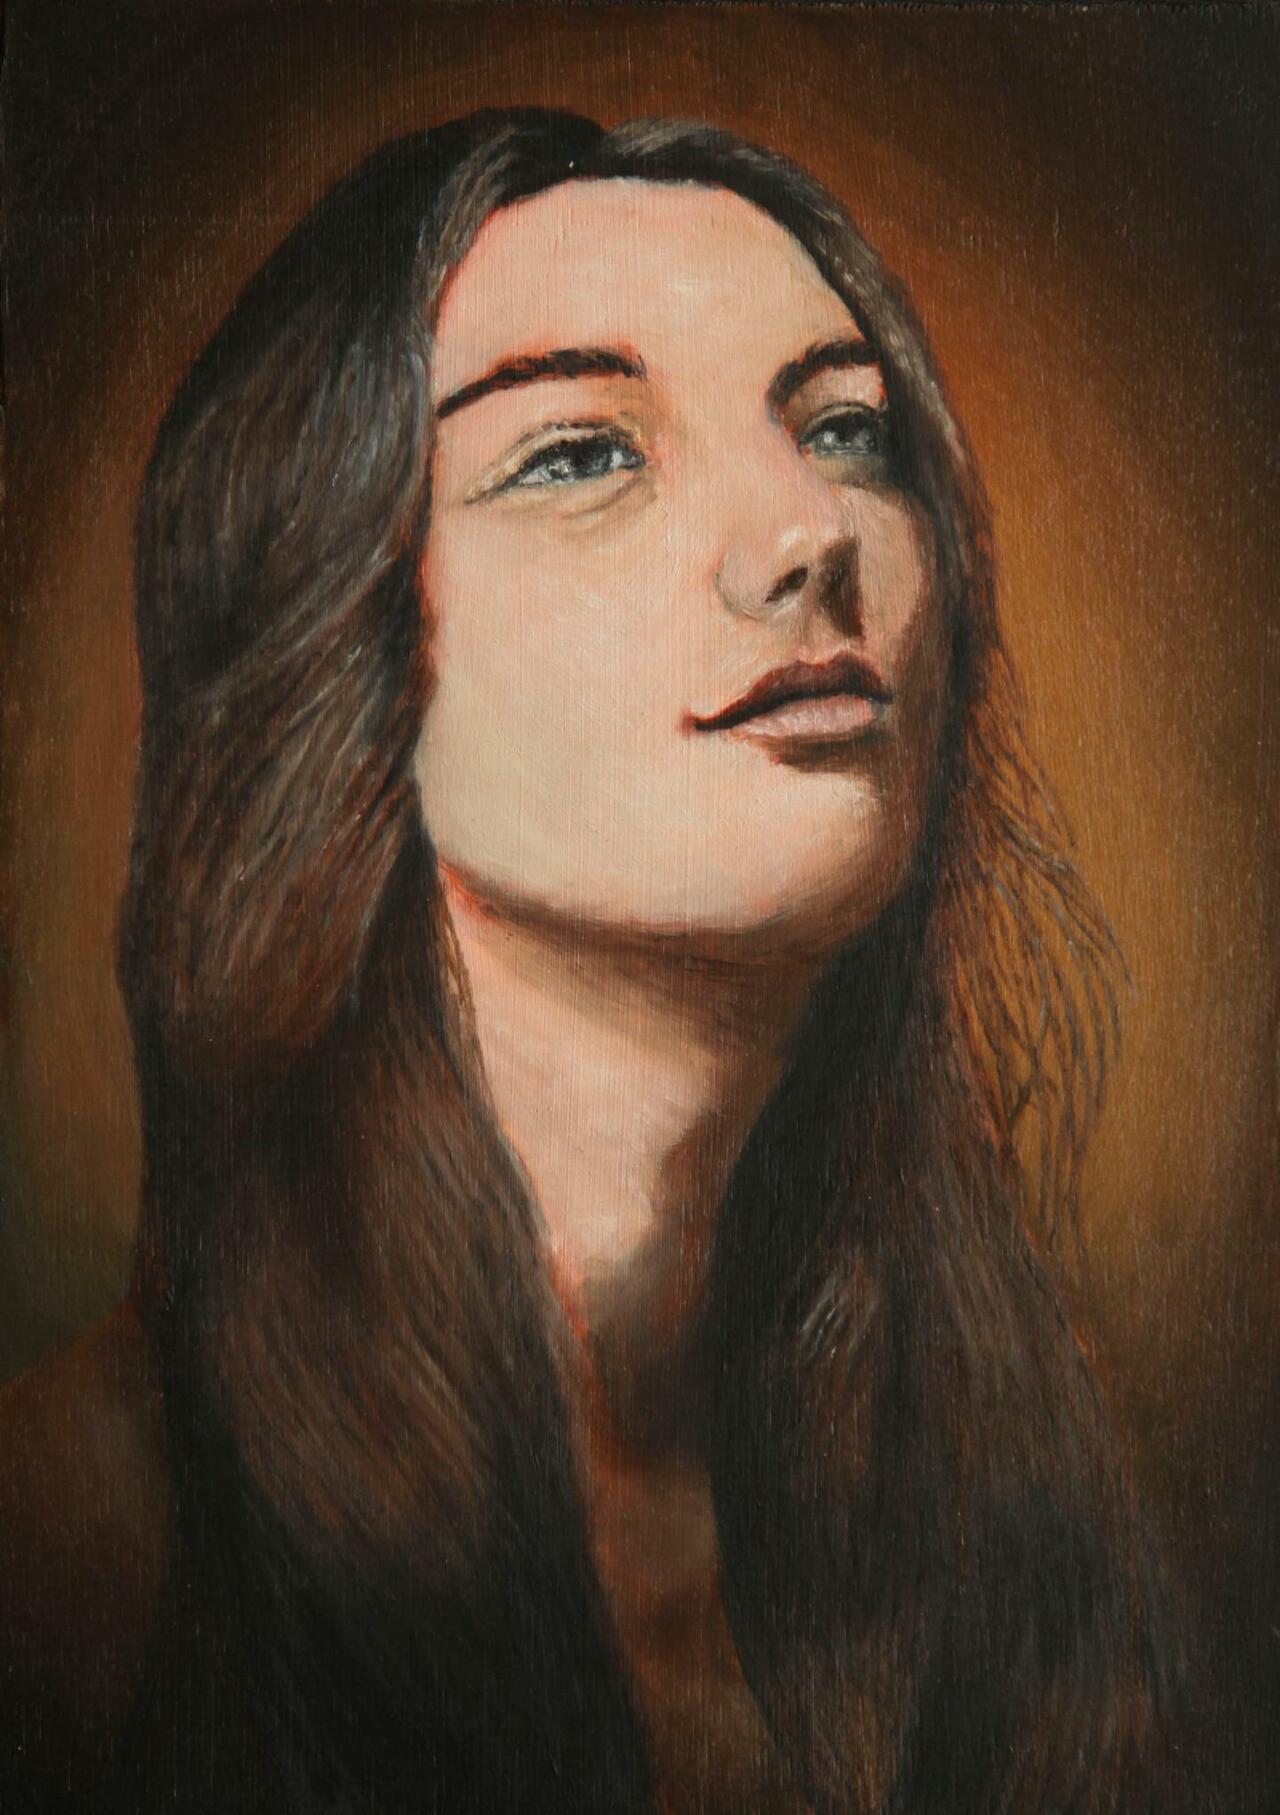 PORTRAIT. This is one oil painting on panel. Hope you like it.

#art #painting #oilpainting

http://kaikunst.blogspot.com.es/2015/01/portrait.html http://t.co/YMuFzJsqS5